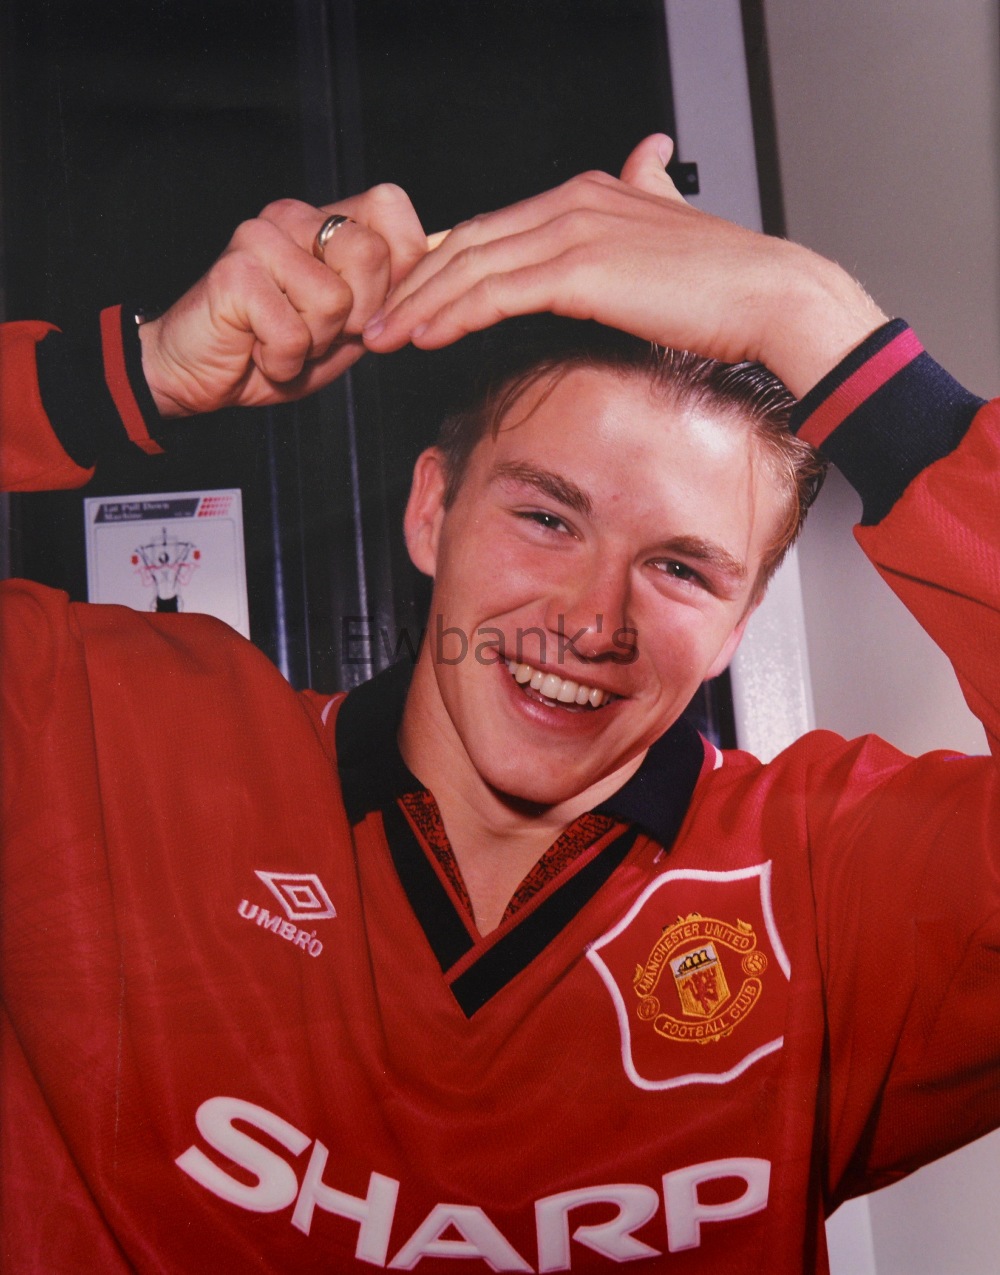 David Beckham, English Footballer, colour photograph taken in his early playing days at Manchester - Image 2 of 2